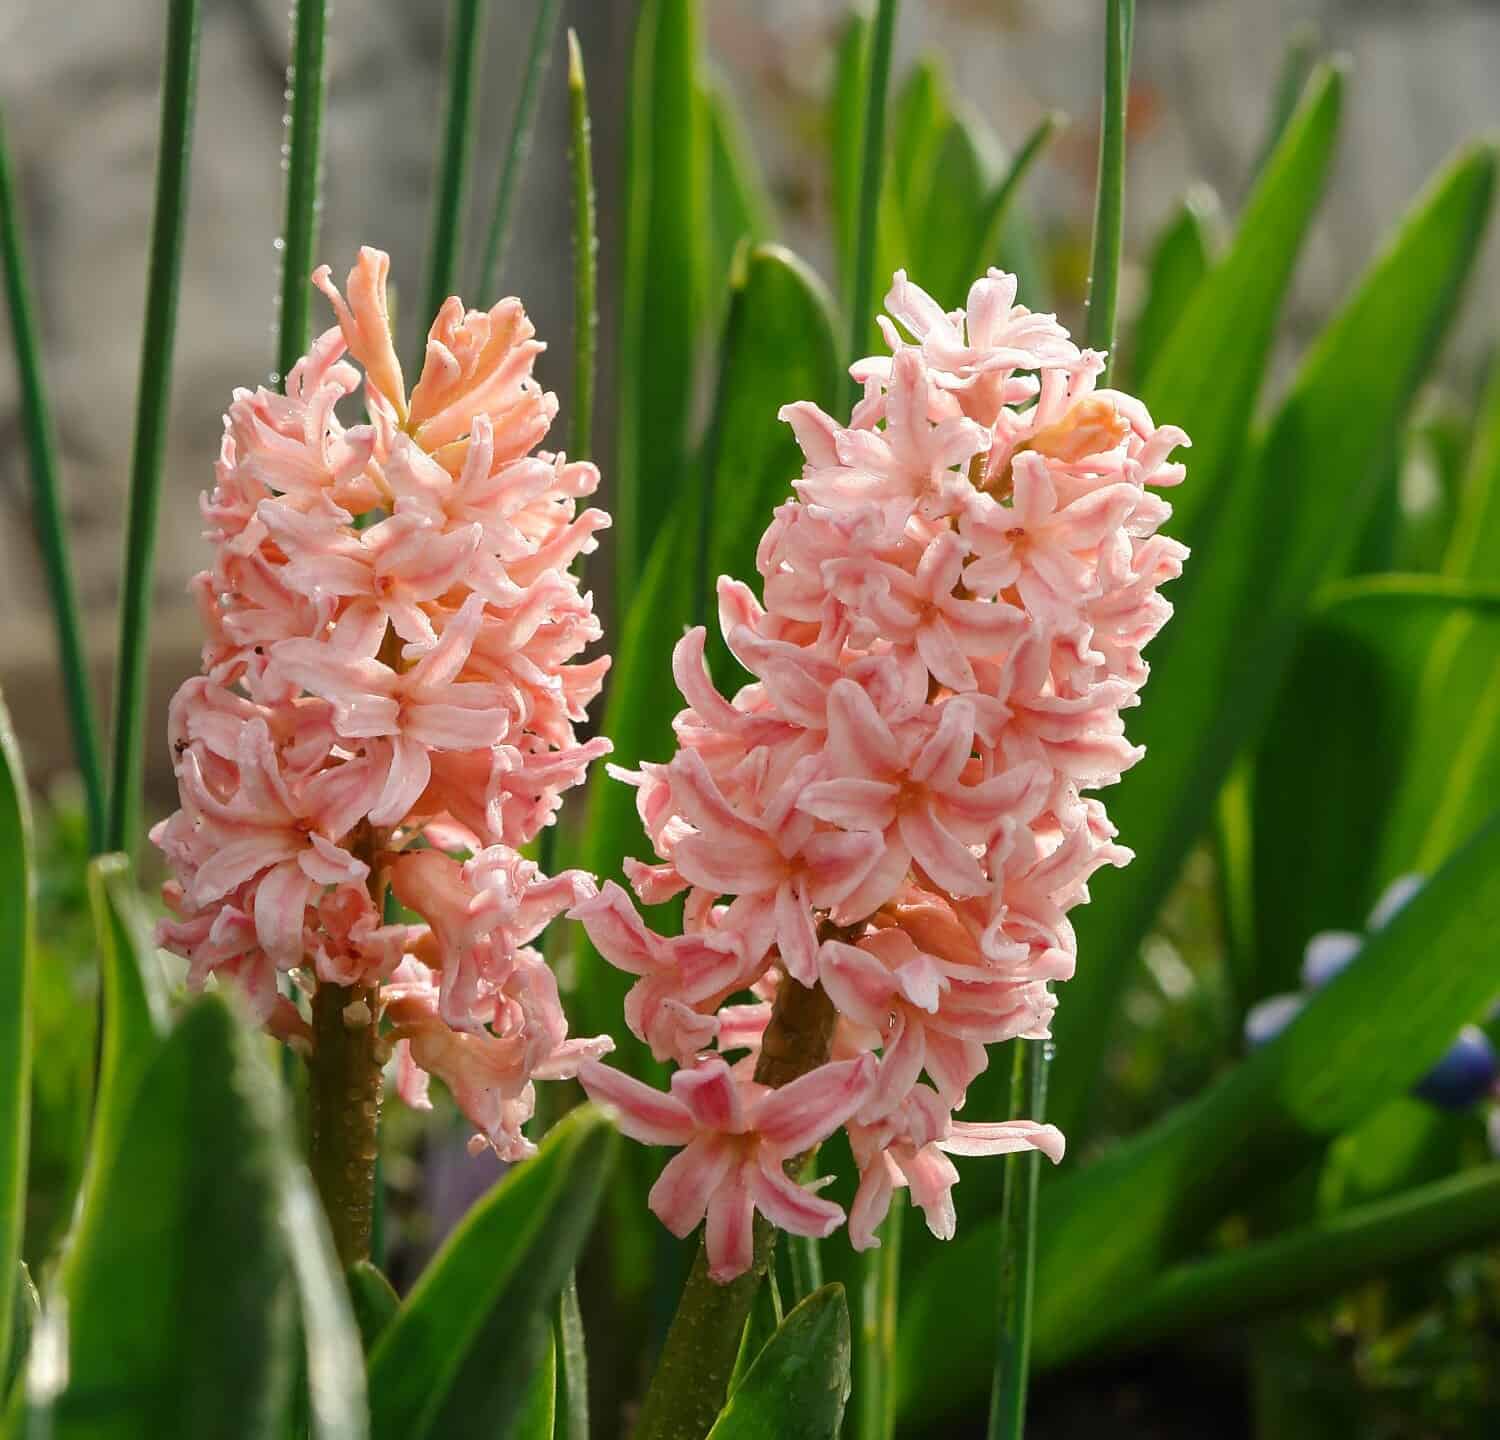 A close up of coral hyacinths of the 'Gipsy Queen' variety (Hyacinthus orientalis) in the garden